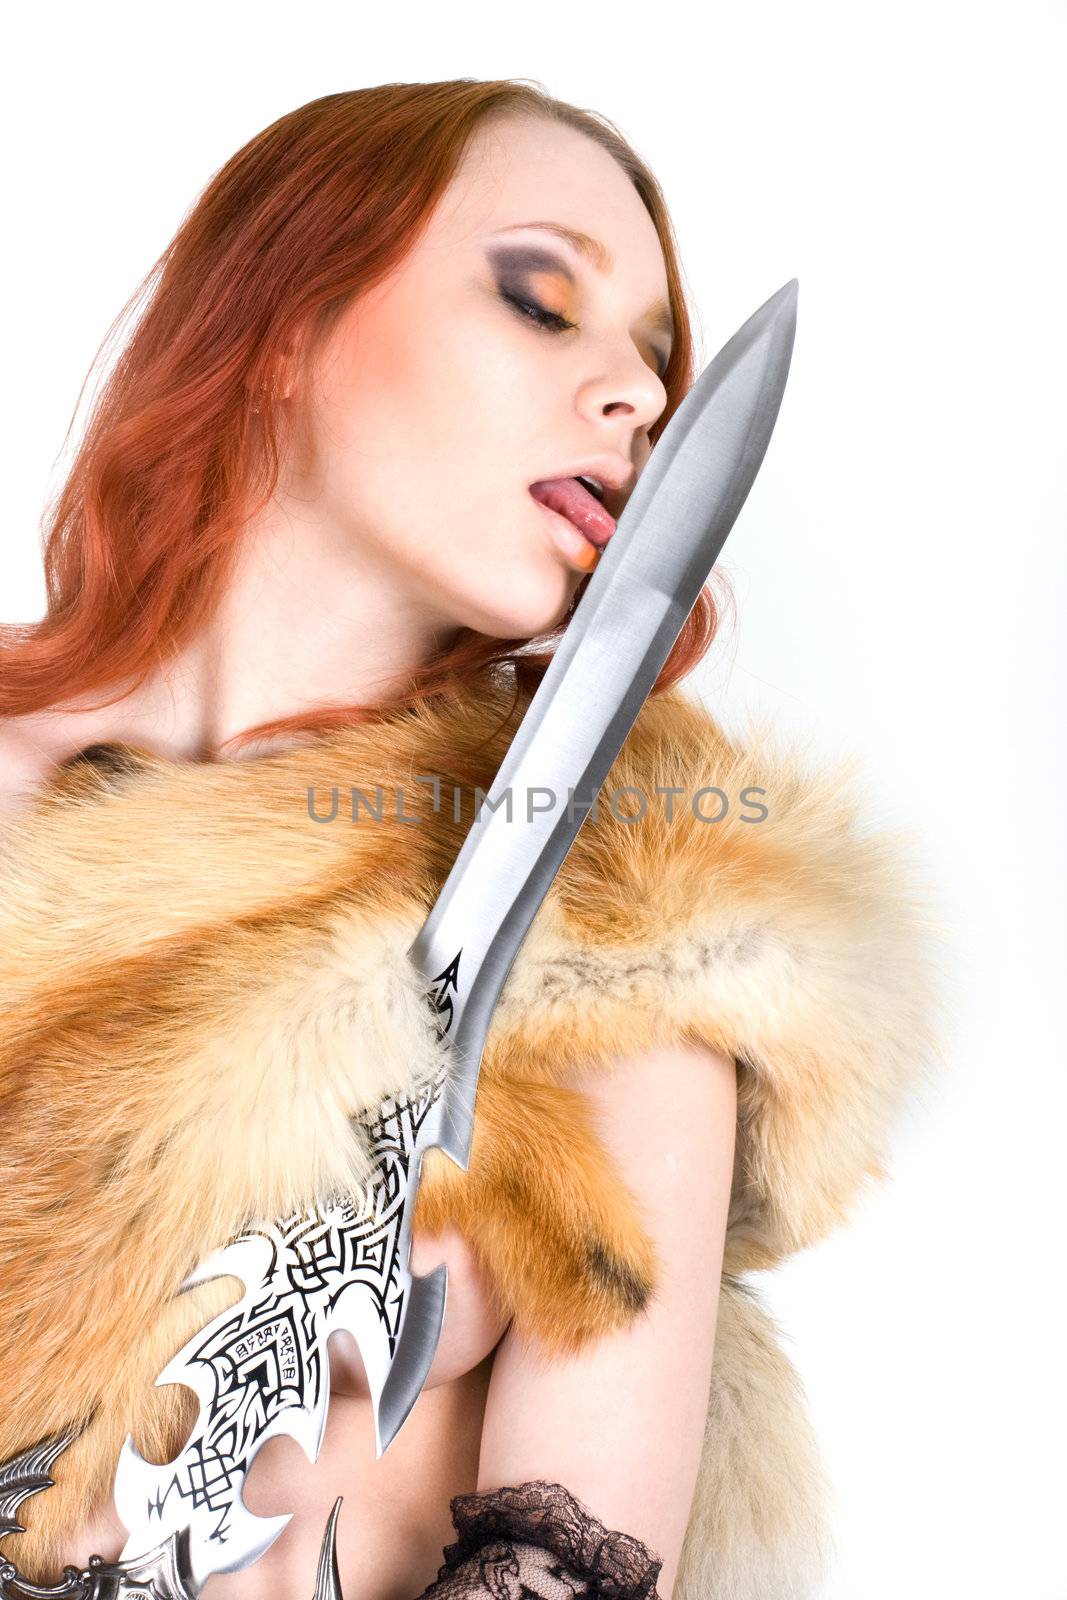 Young sexy redhair woman licking a sword